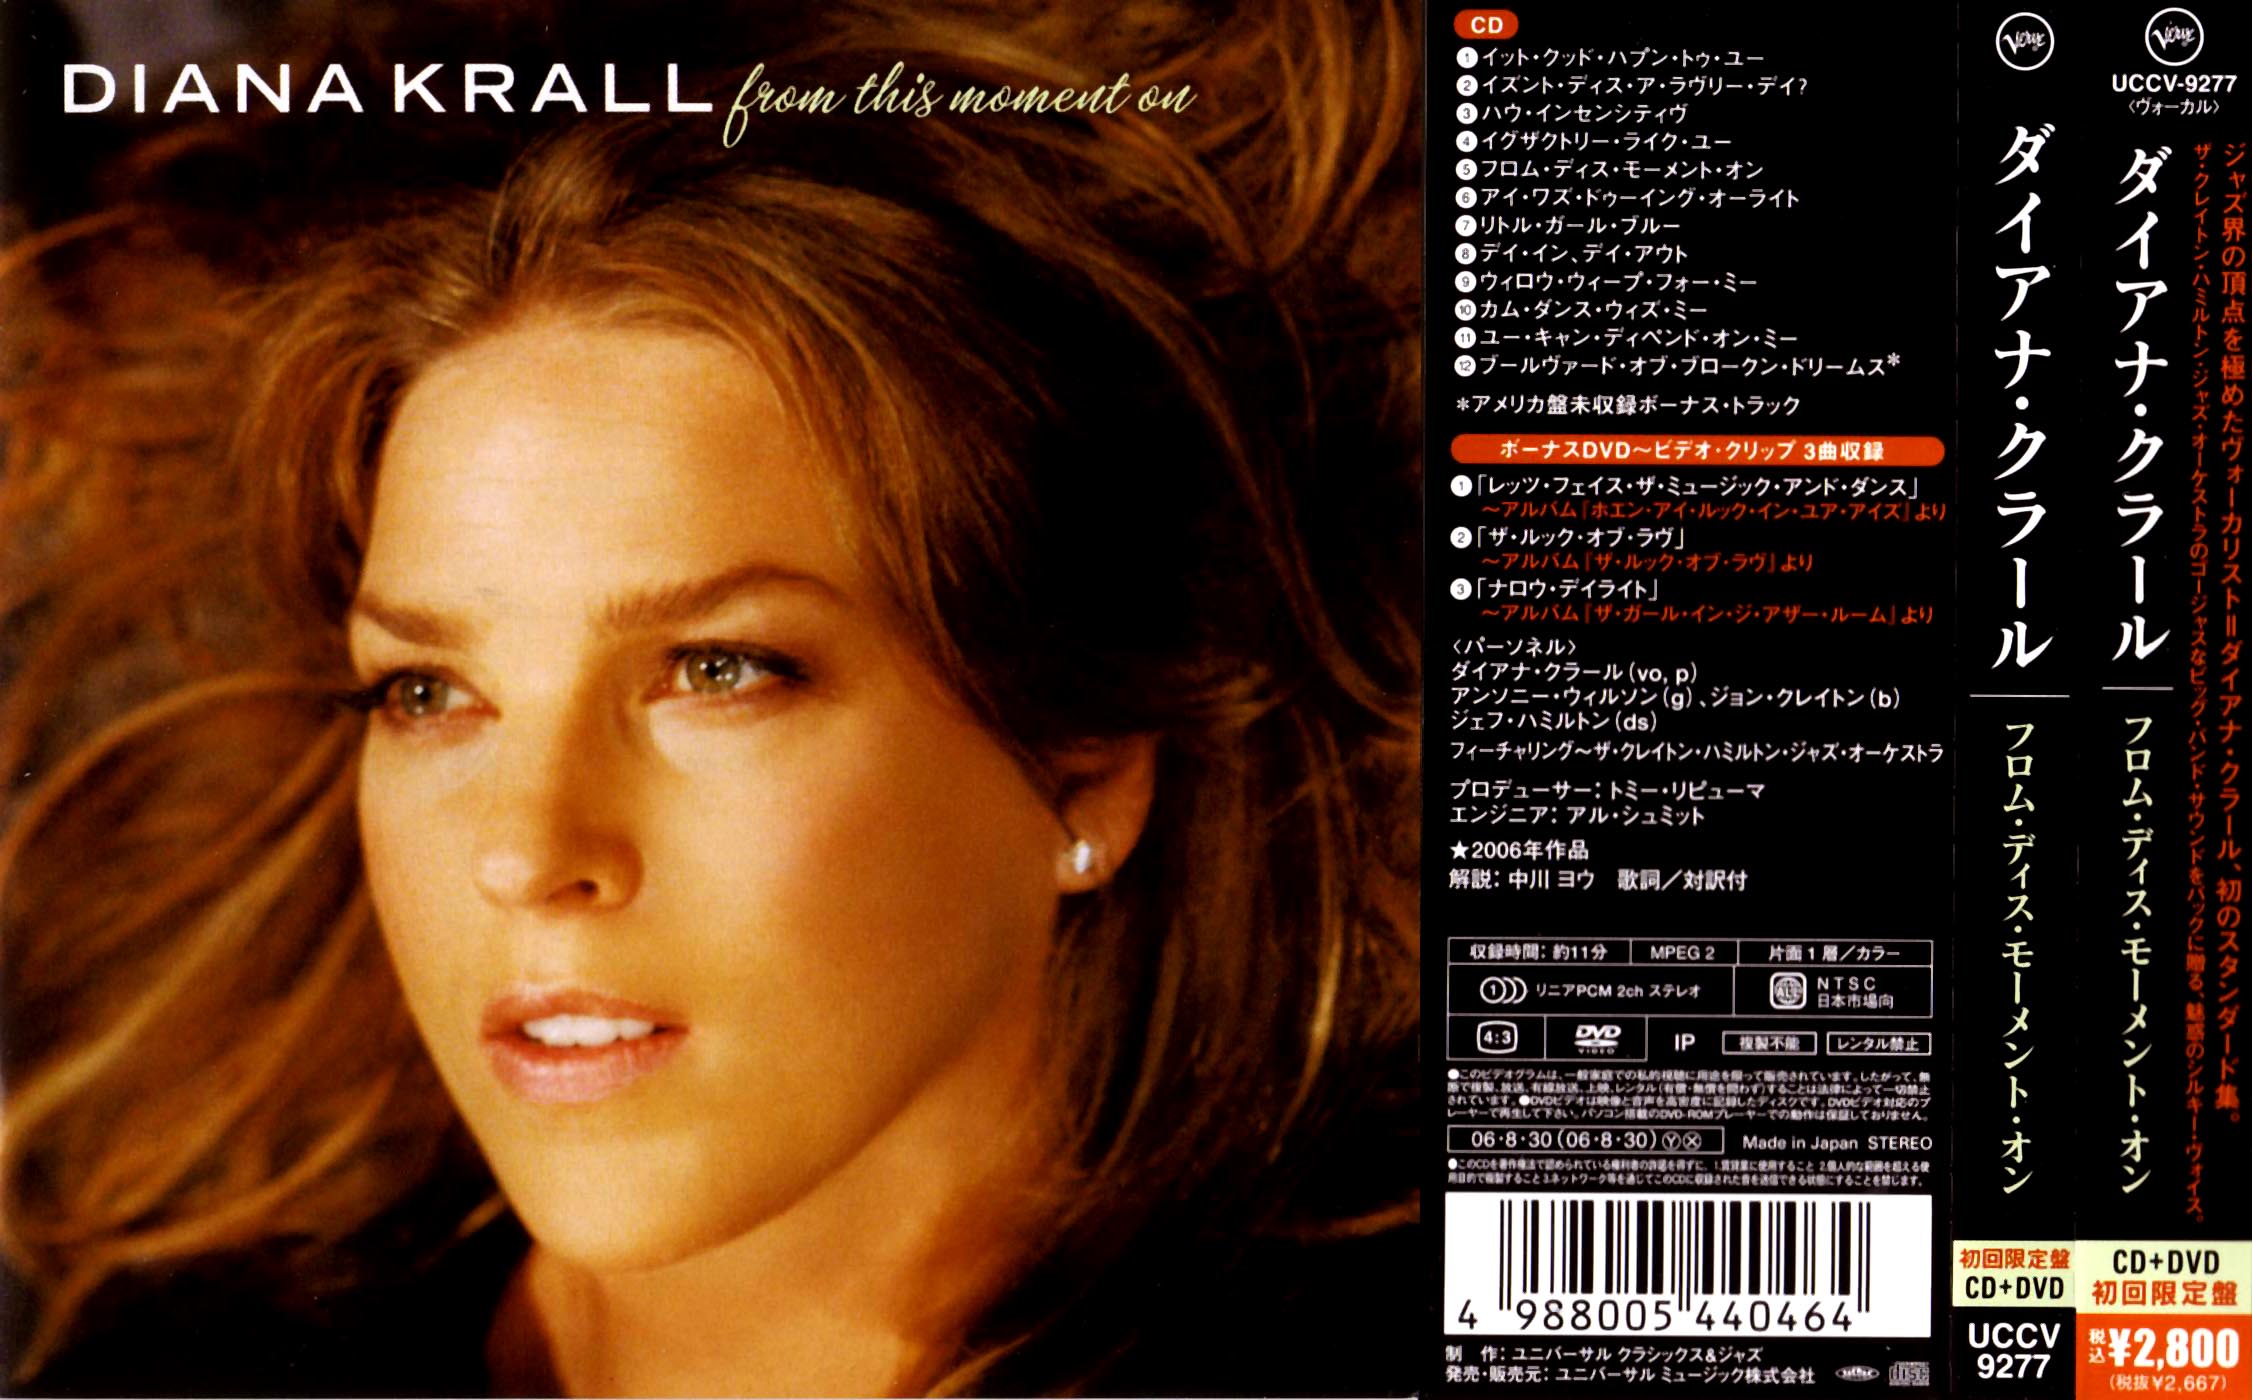 DIANA KRALL「from this moment on」（秋だからジャジーに暮れて７）_e0022344_1384639.jpg